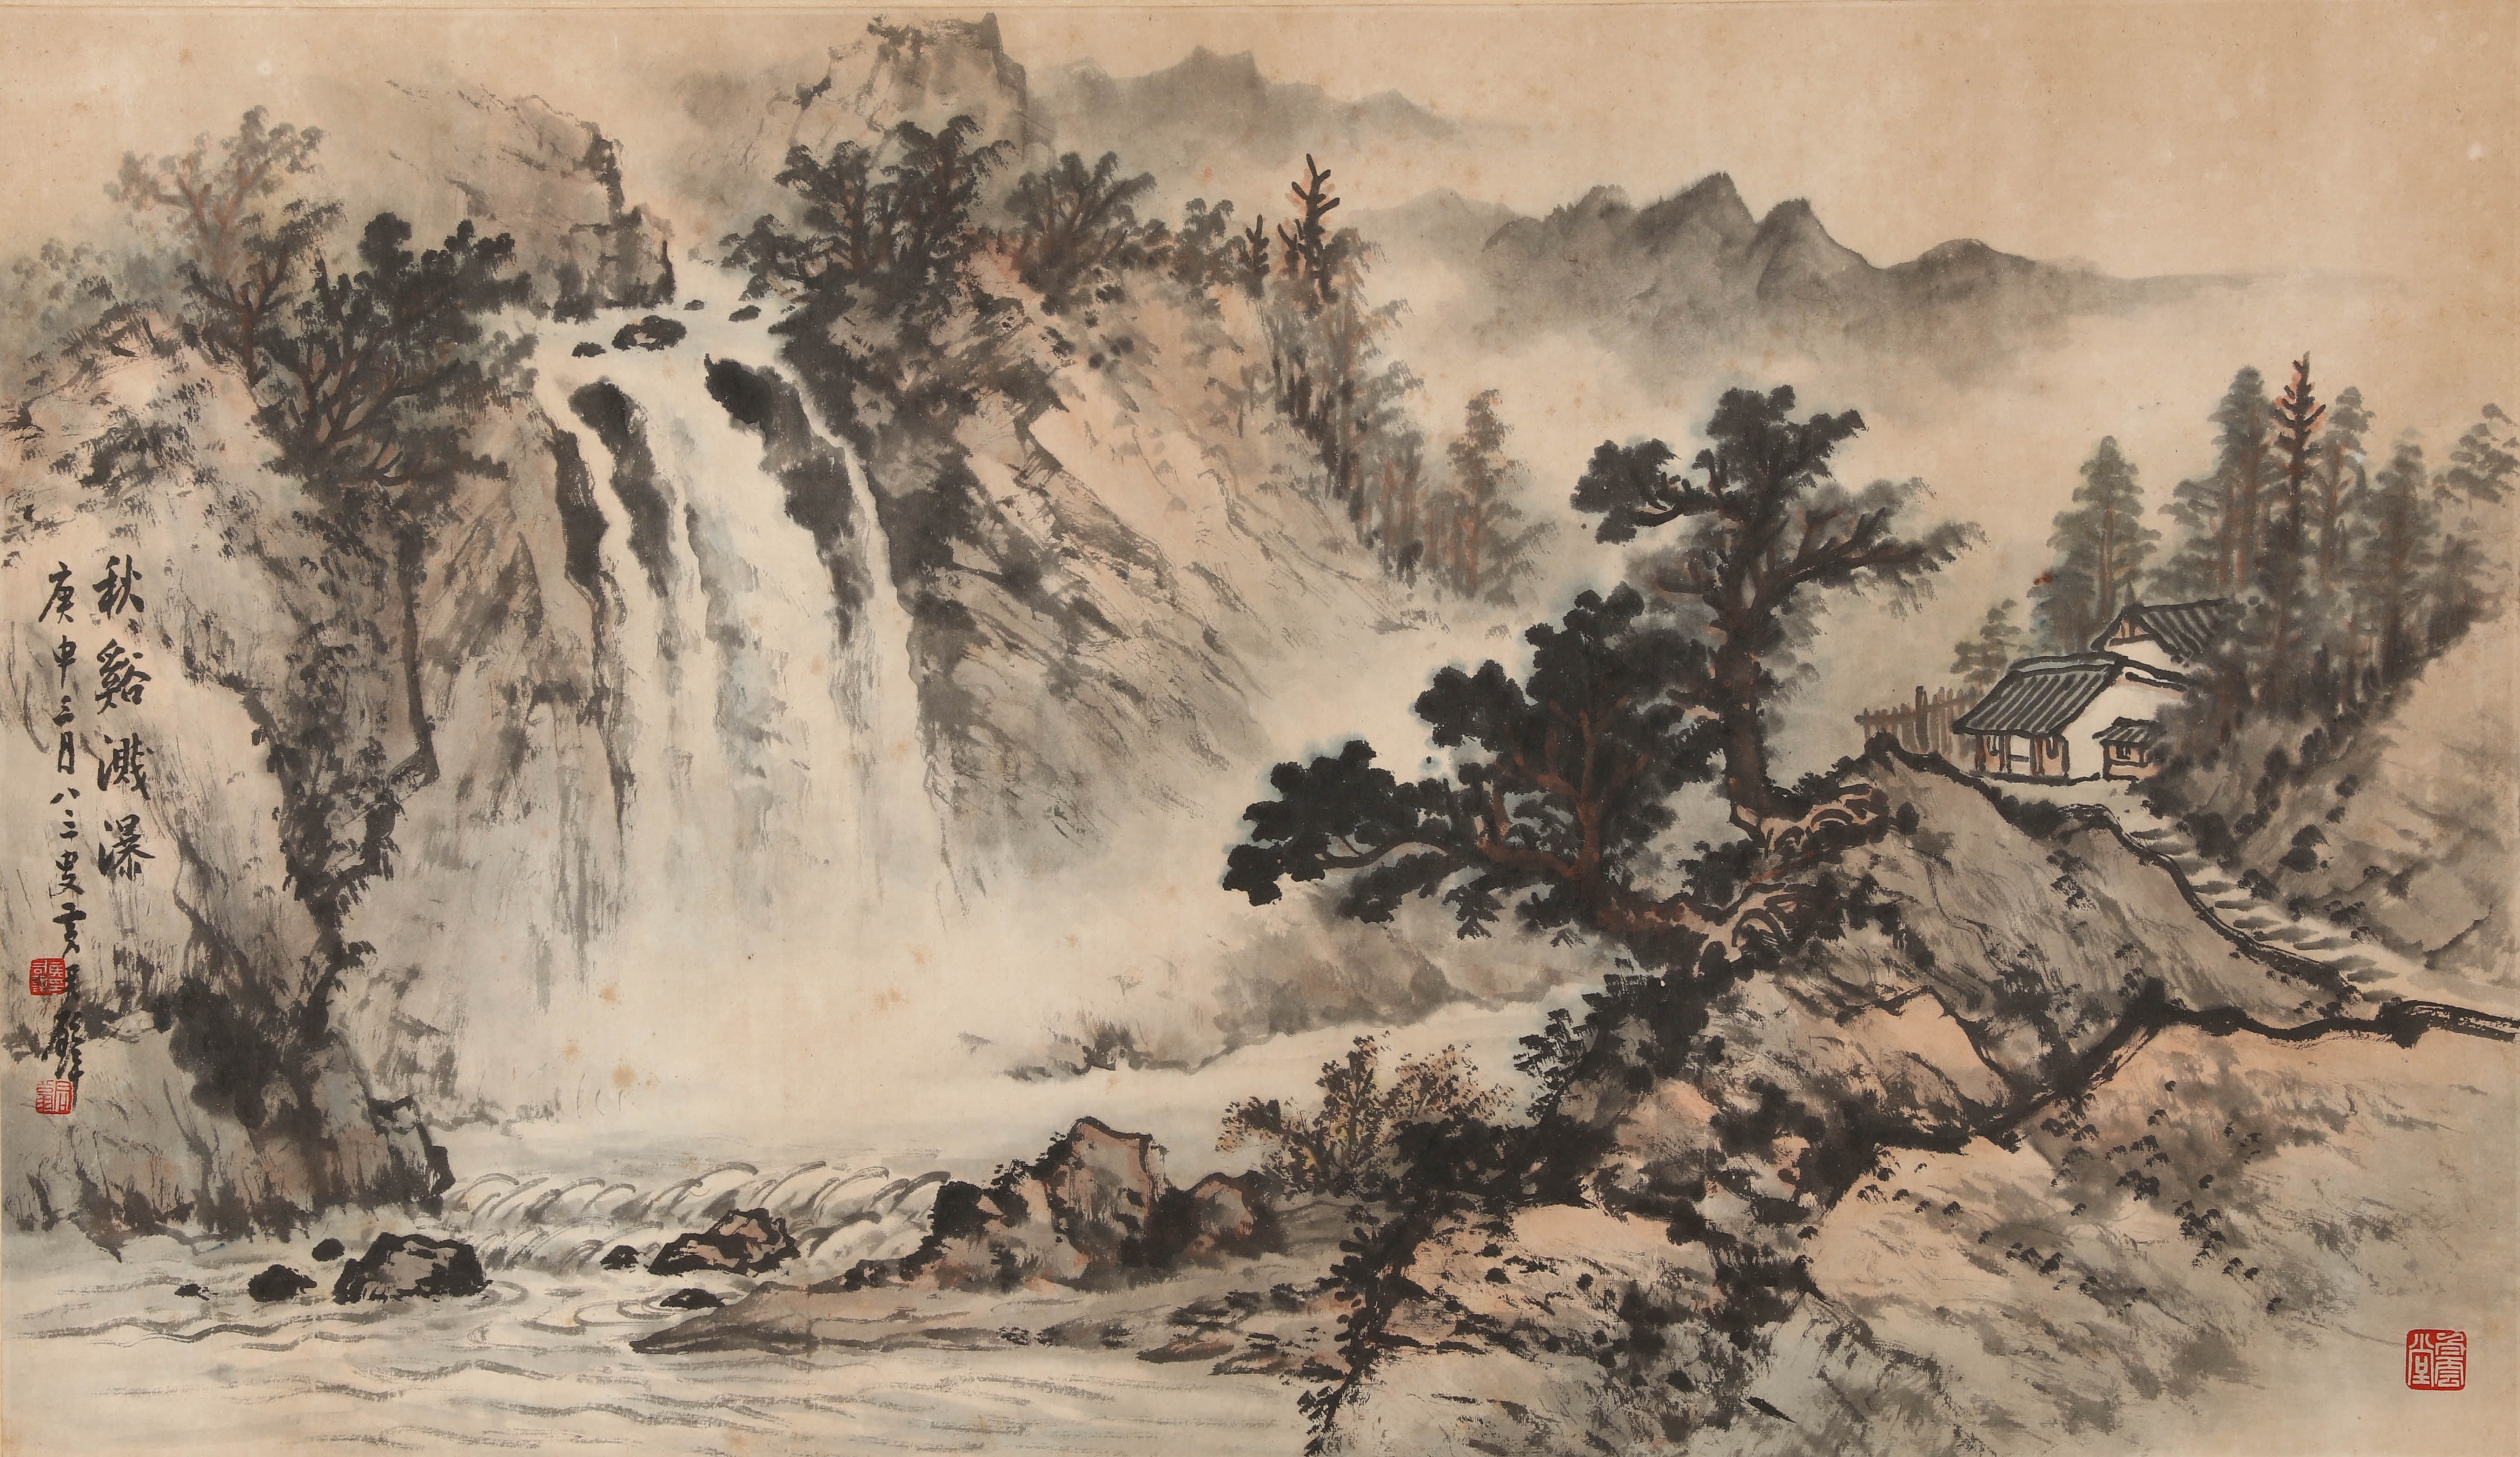 Artwork by Huang Junbi, WATERFALL IN AUTUMN MOUNTAIN, Made of ink and color on paper